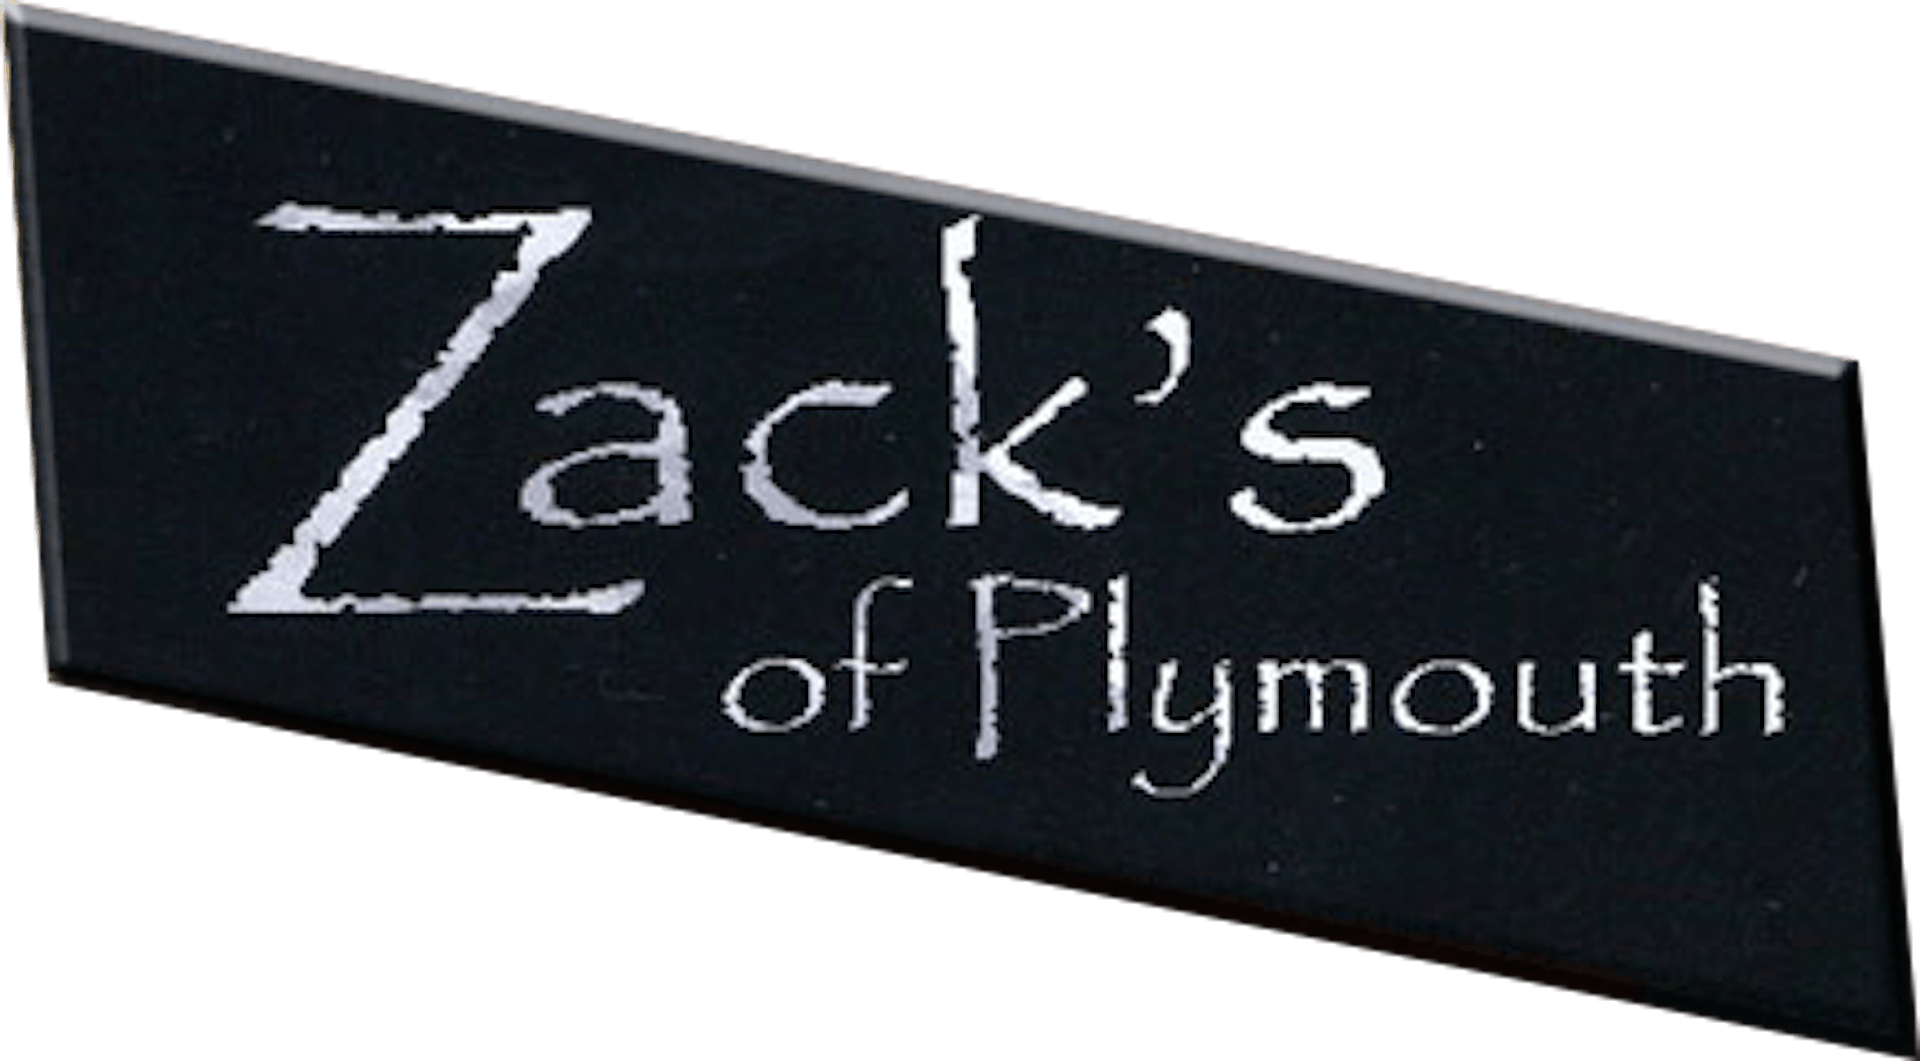 Zack's of Plymouth